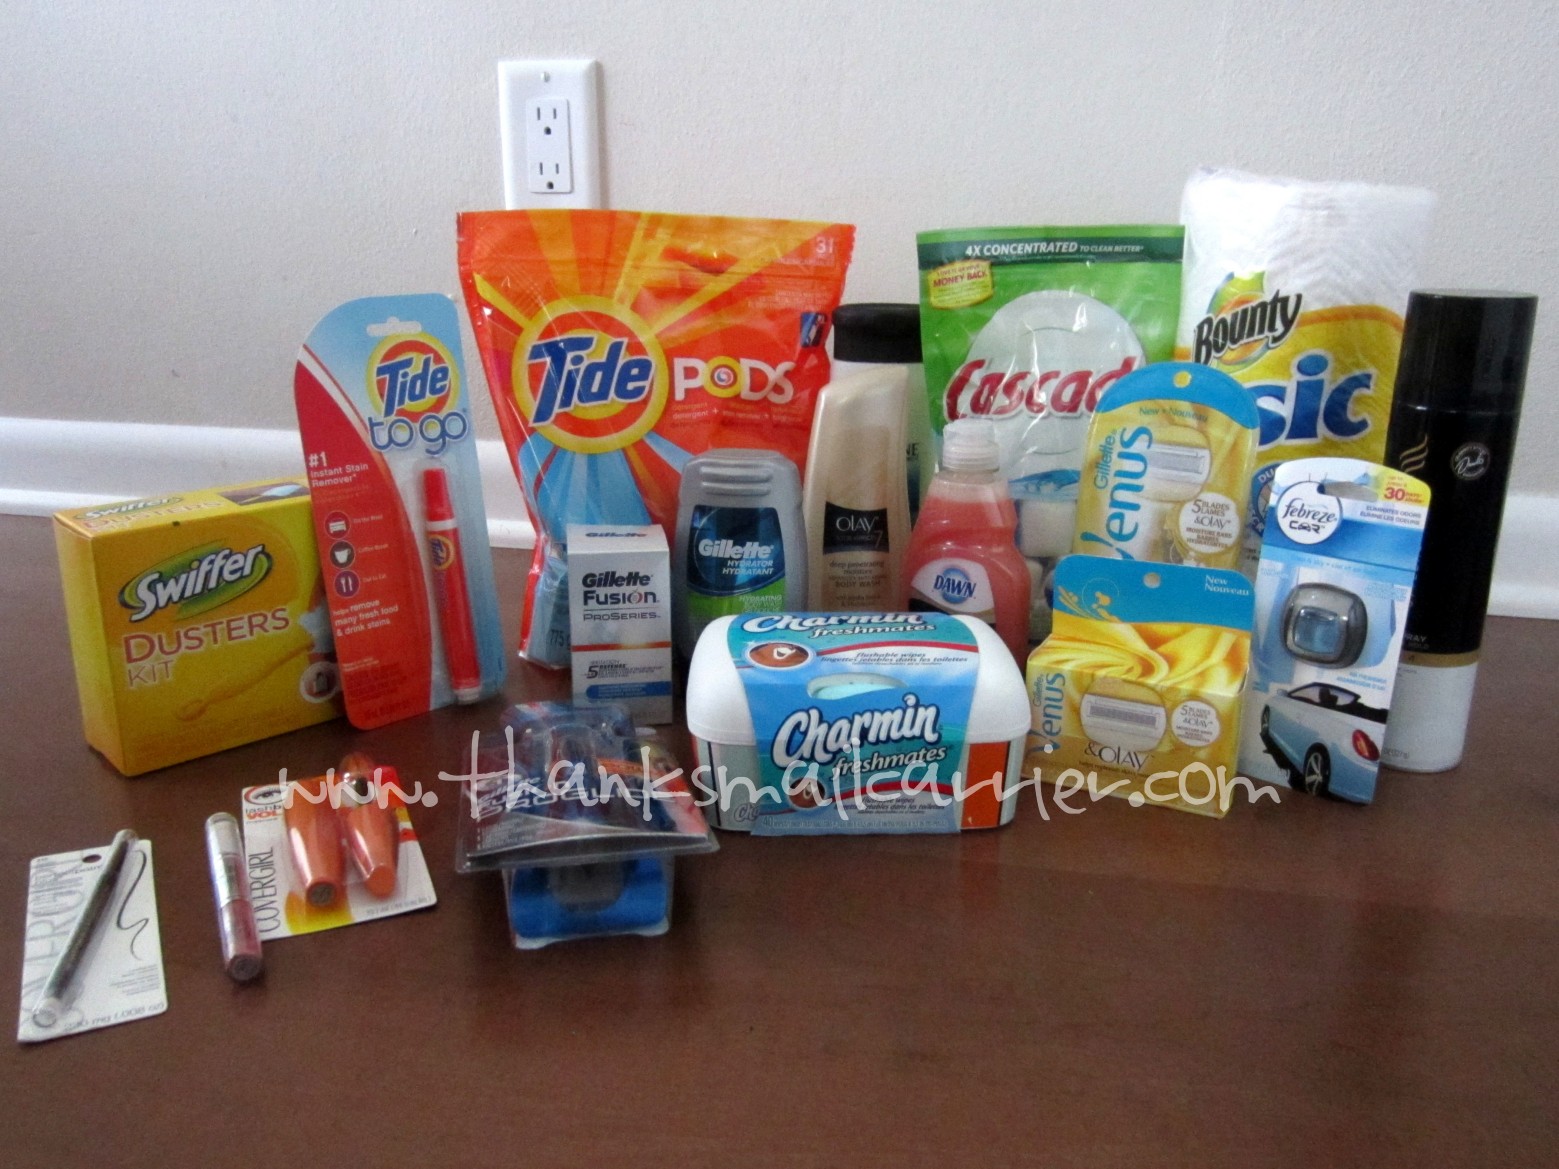 P&G giveaway